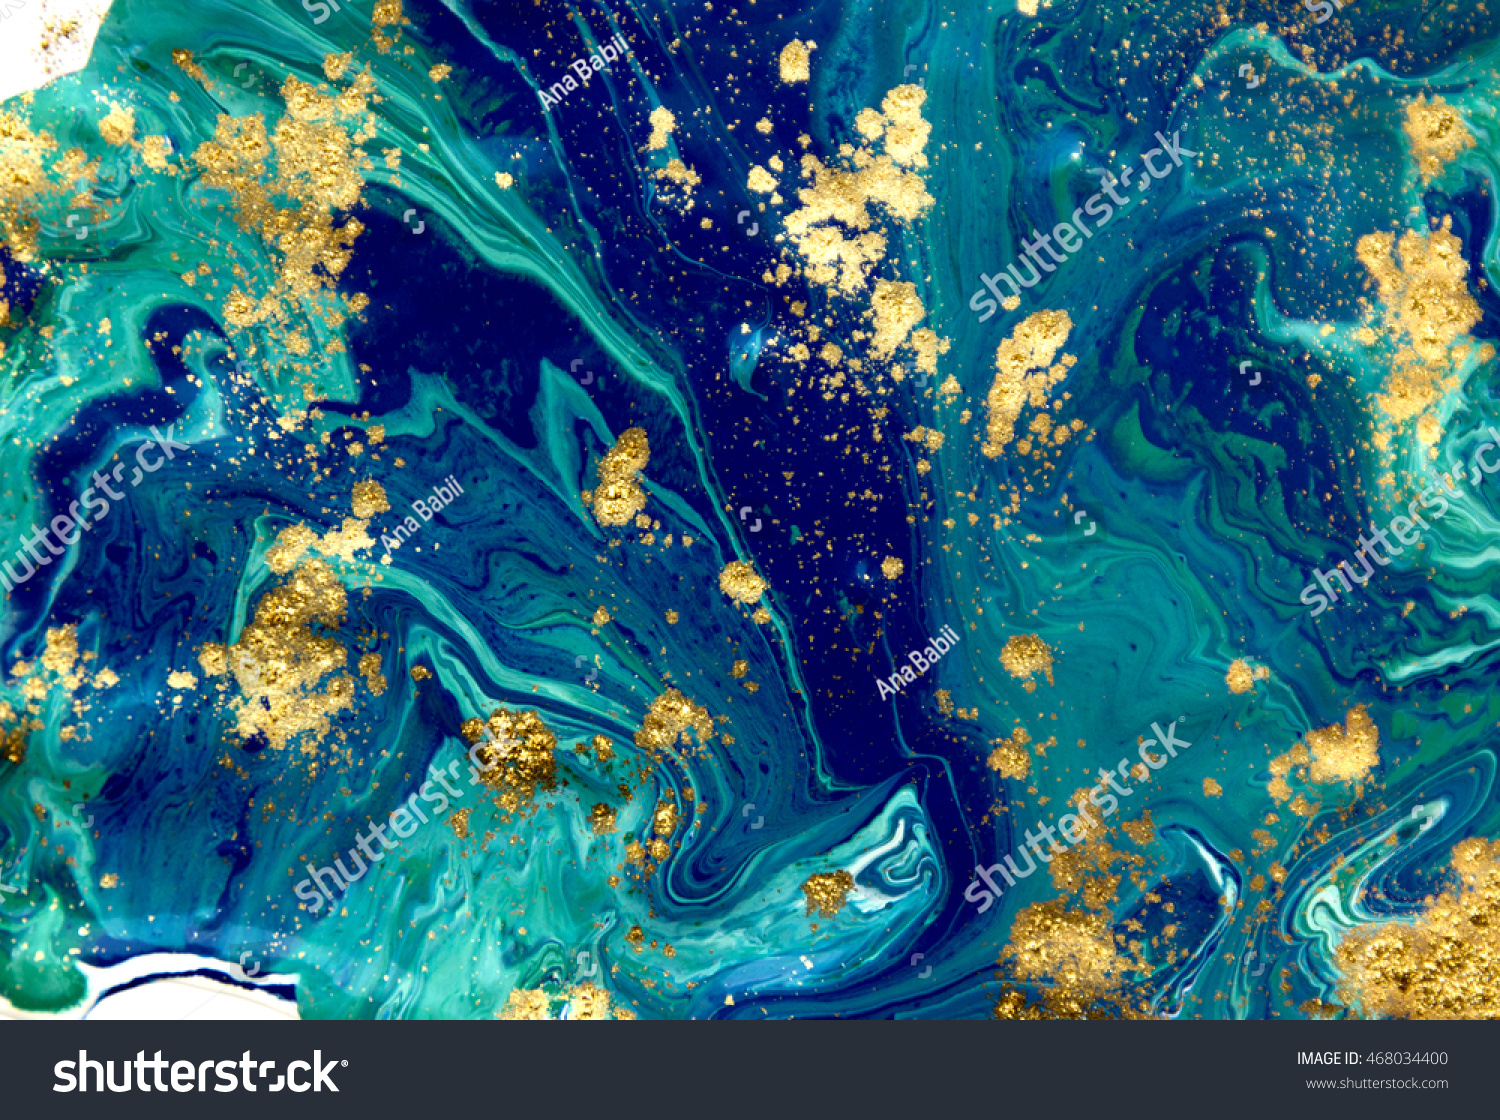 Marbled blue abstract background. Liquid marble pattern. #468034400